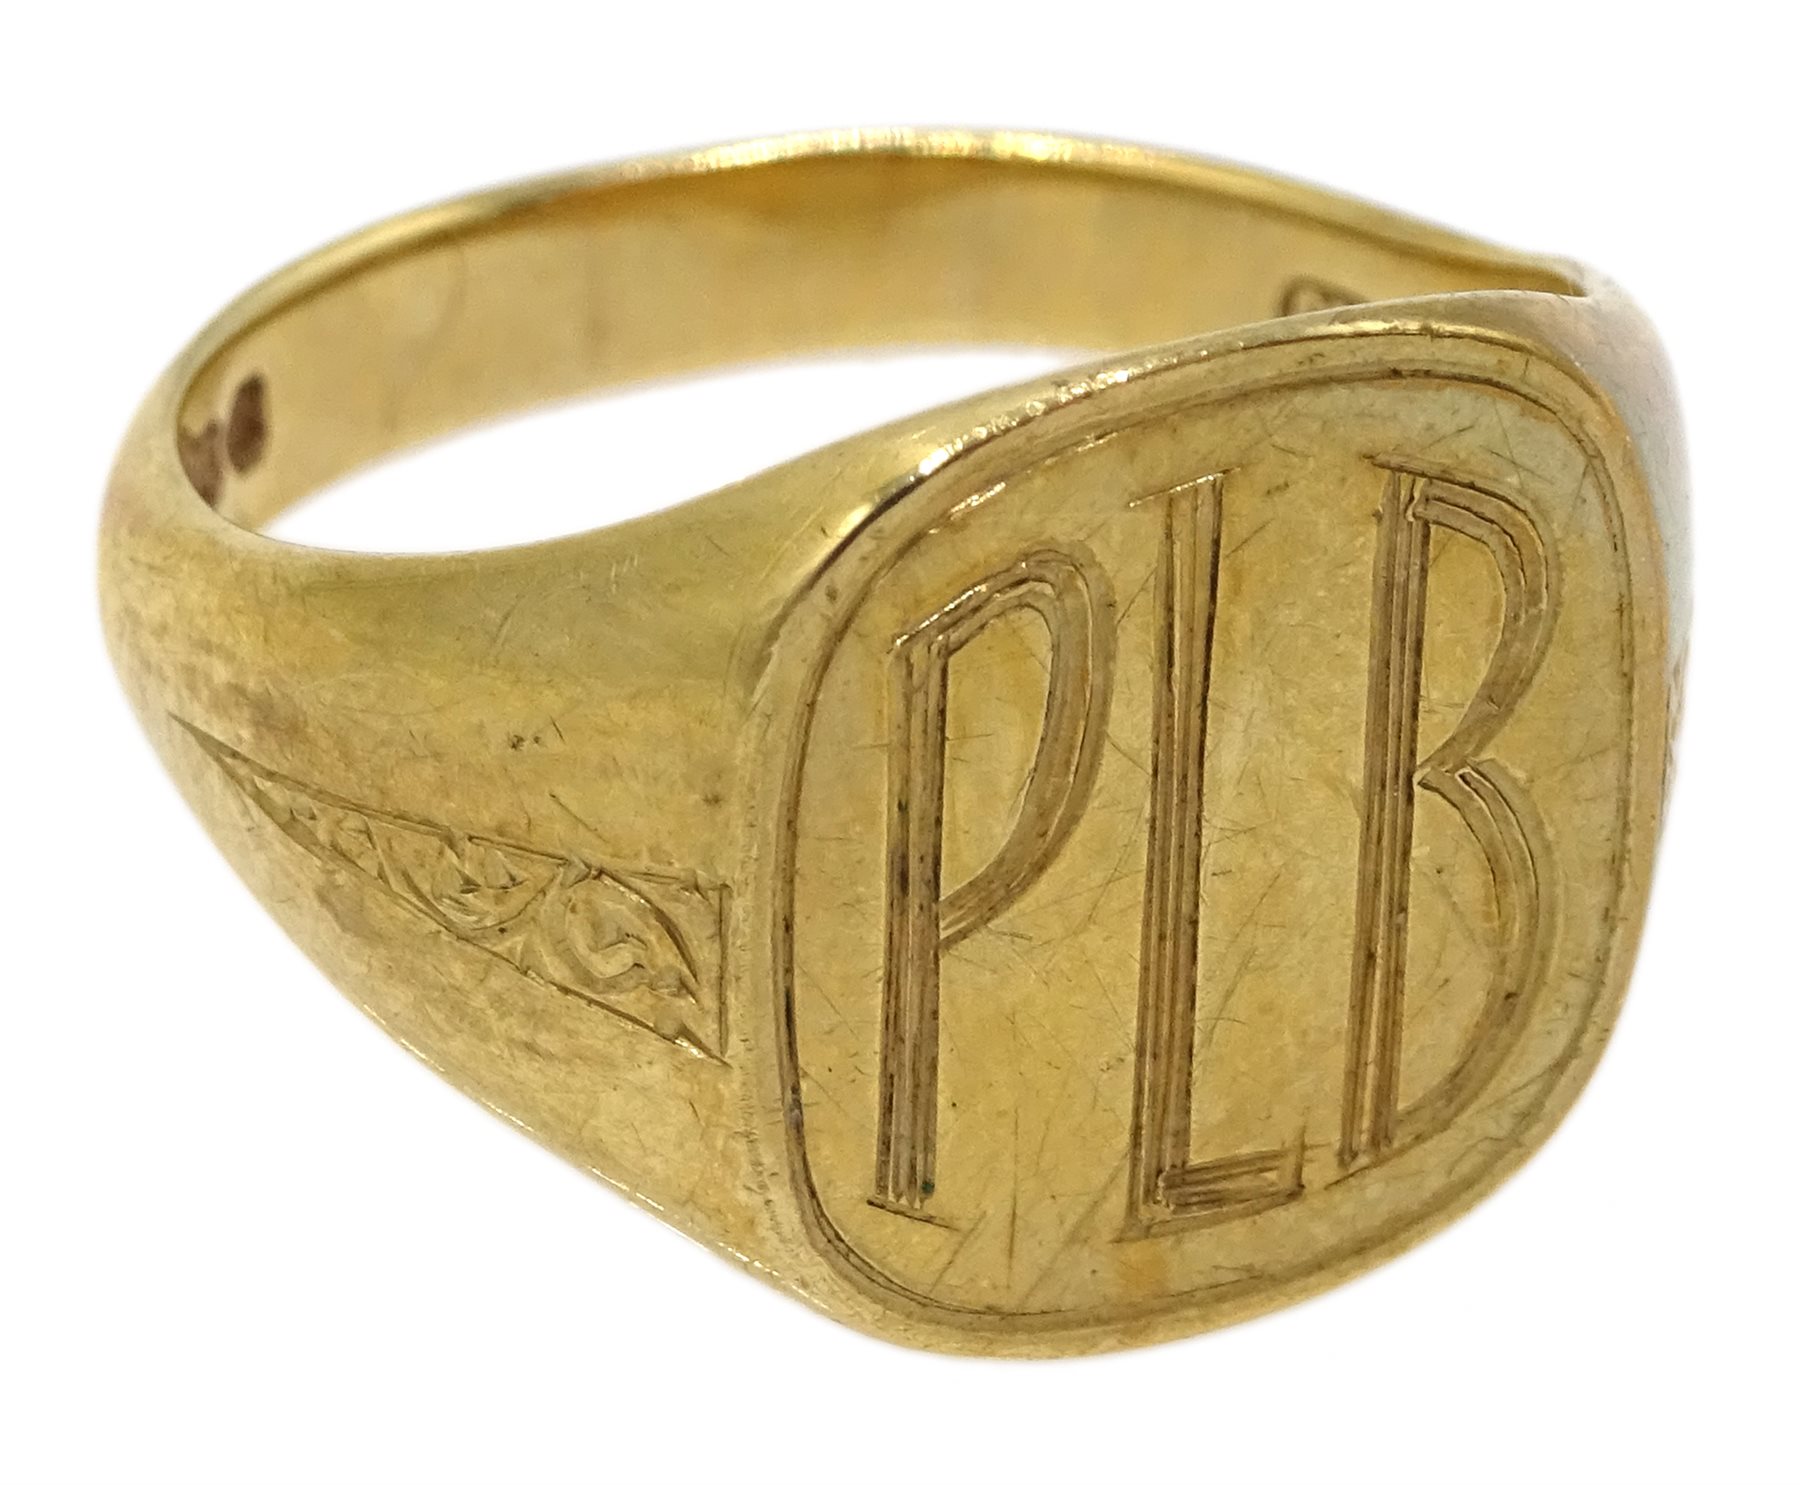 9ct gold signet ring with engraved initials 'PLB', hallmarked, approx 5.96gm - Image 2 of 3